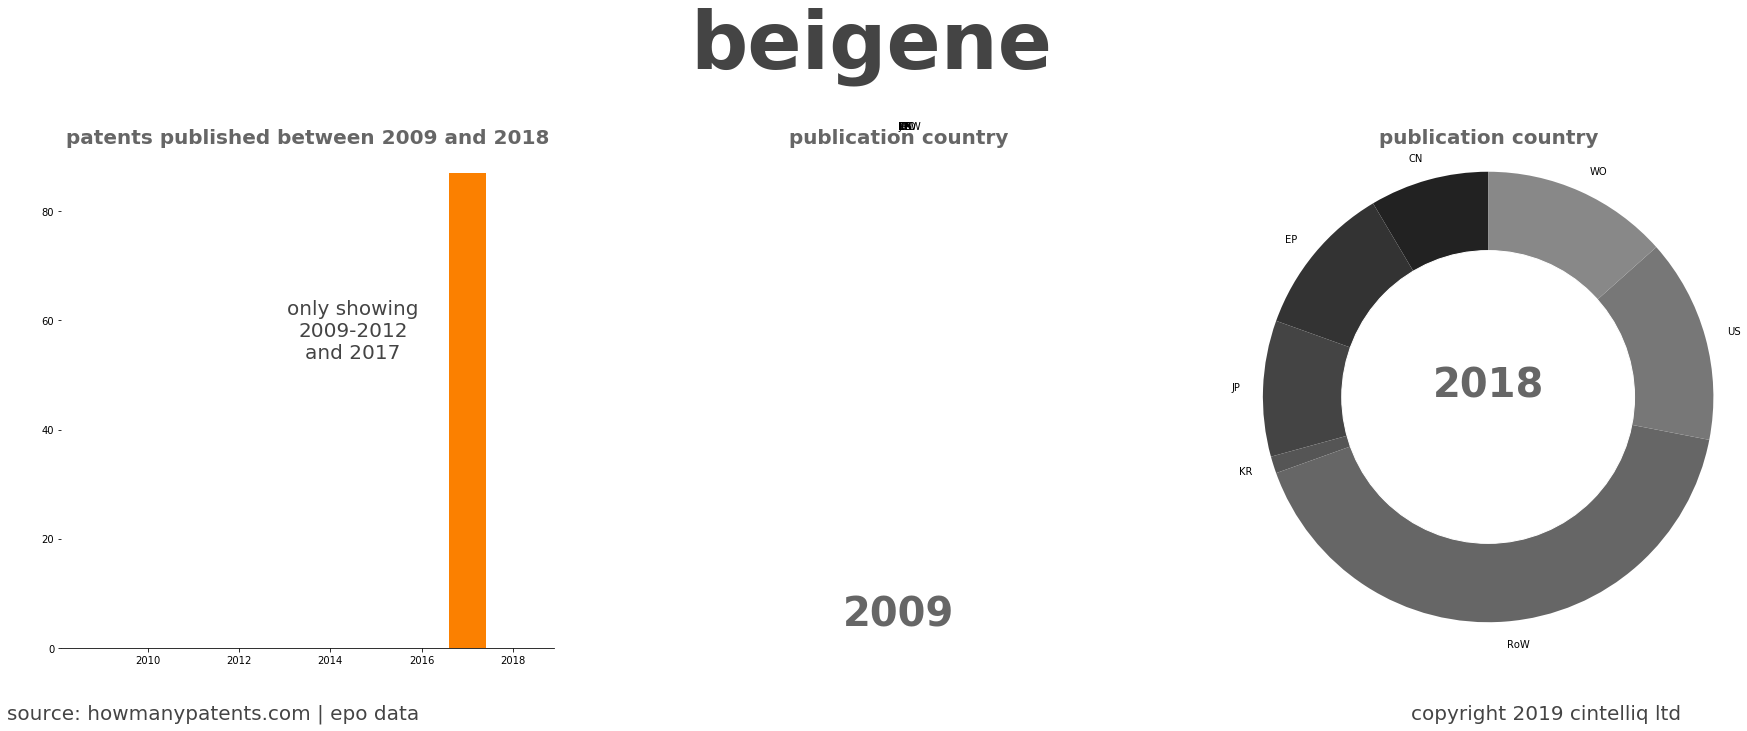 summary of patents for Beigene